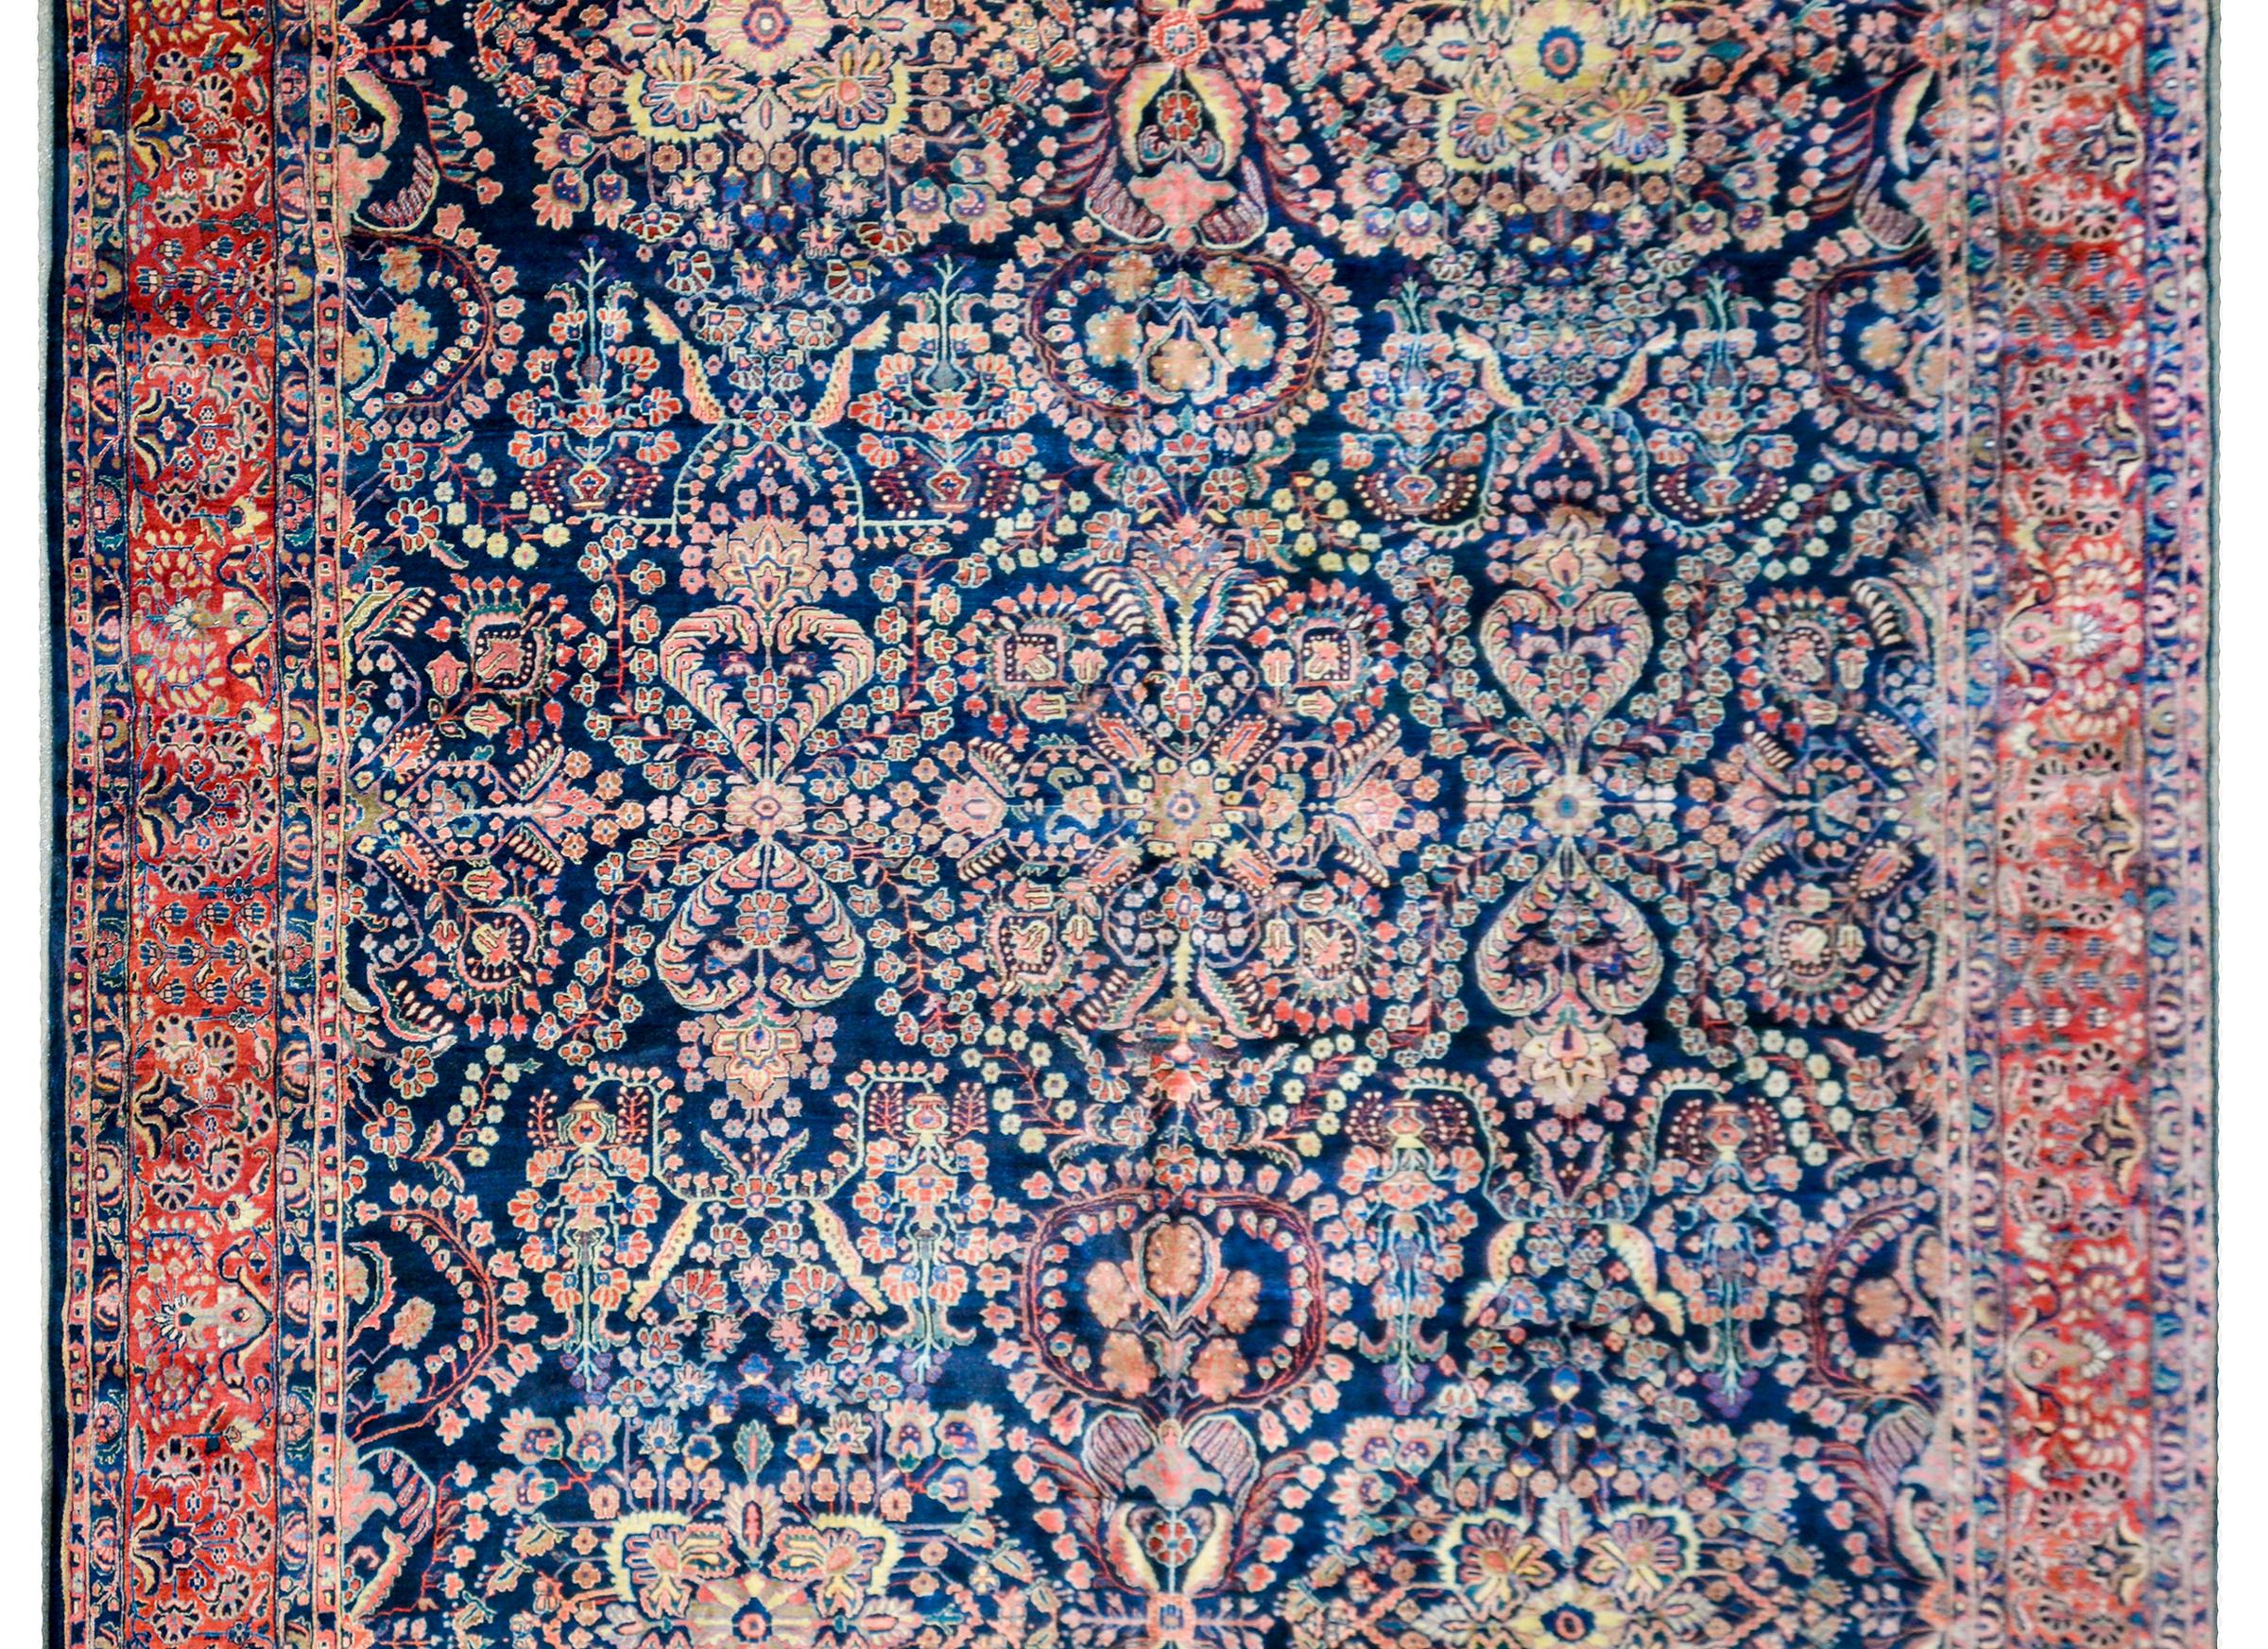 This is one of the most extraordinary early 20th century Persian Sarouk rugs we've ever seen! The central field is composed with large-scale mirrored floral pattern woven in crimson, pink, light and dark indigo, on a bold dark background. The border